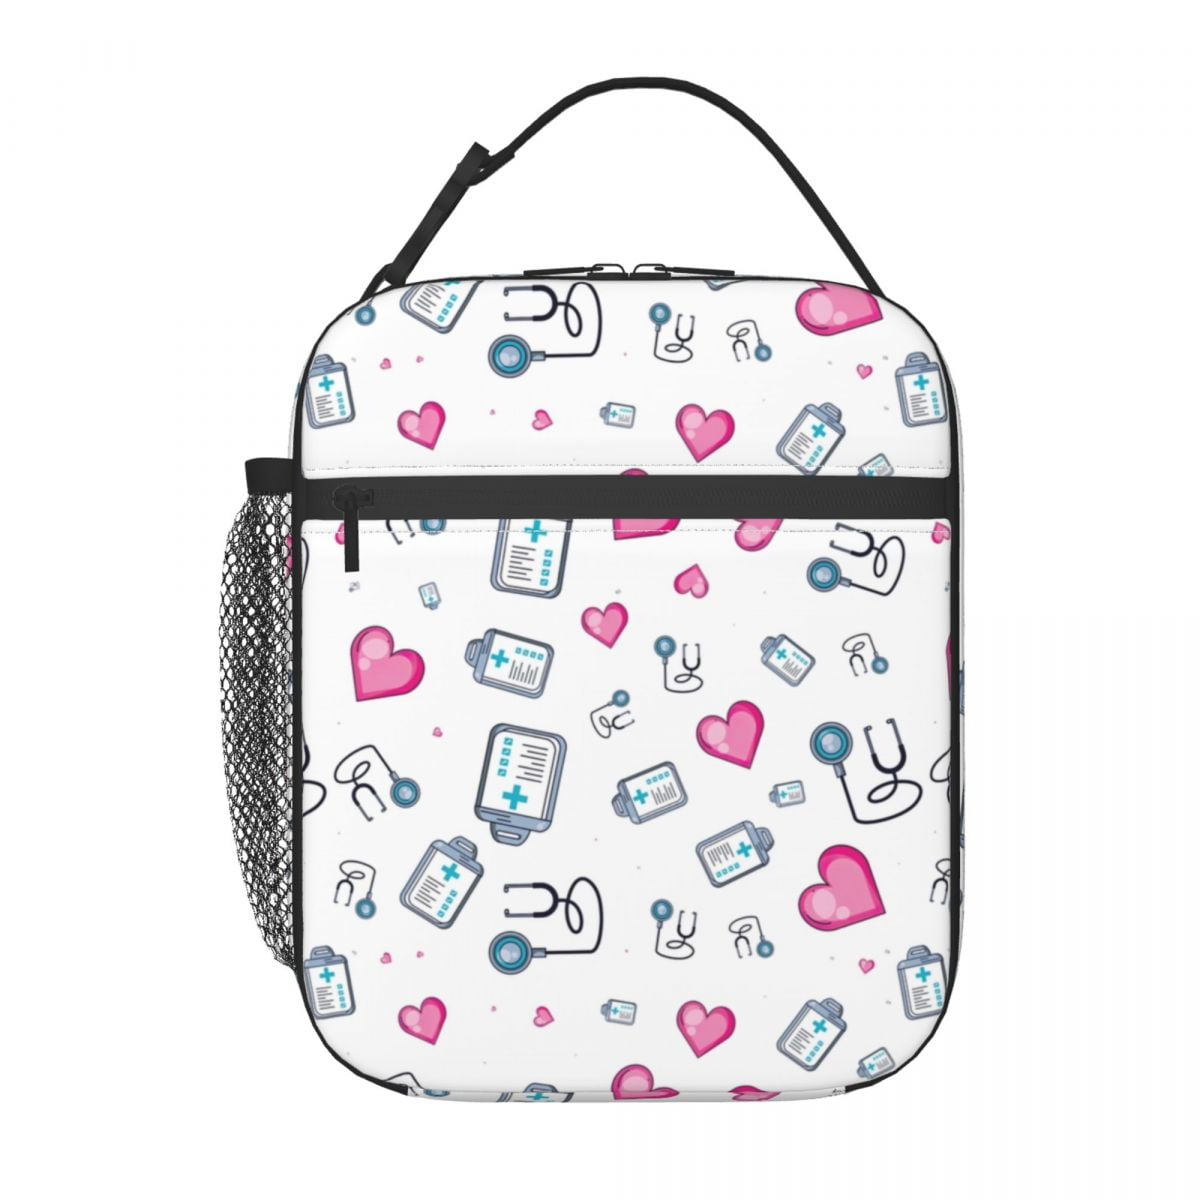 Nurses is a work of heart Insulated Lunch Bag Blue